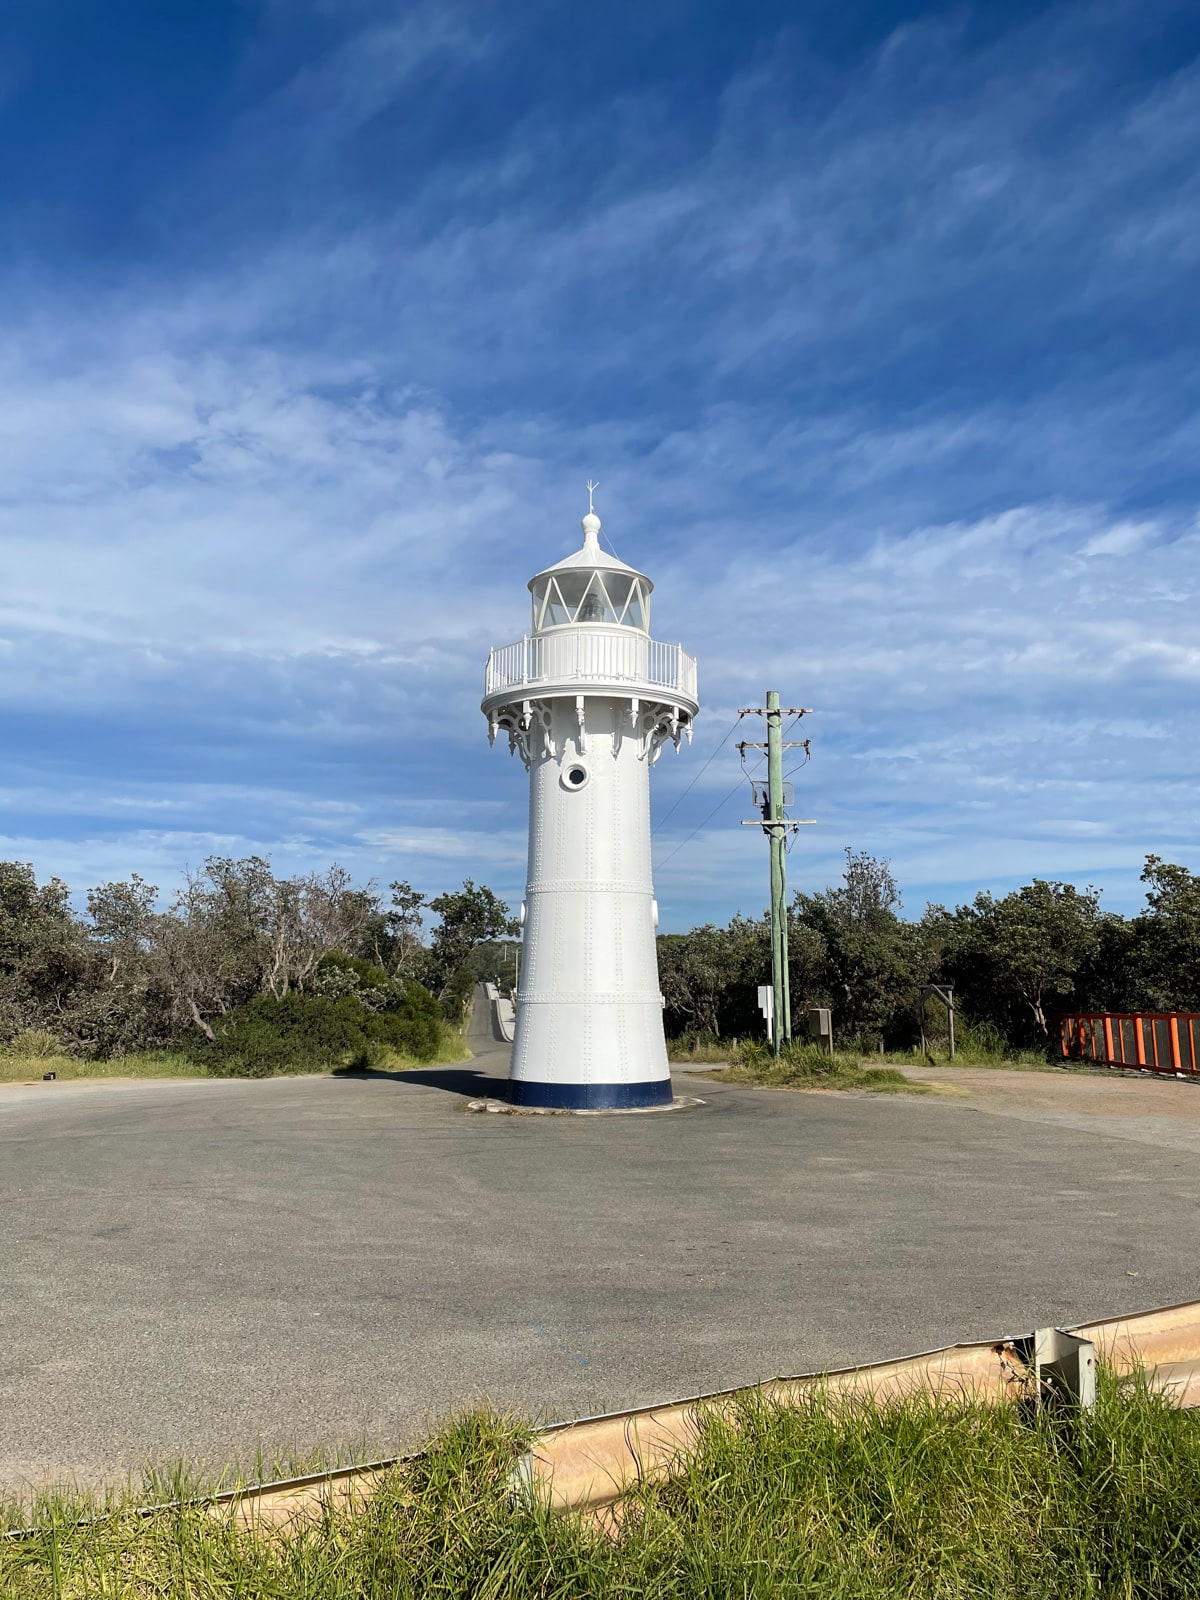 A white lighthouse in the middle of a dead-end road. The sky in the background is blue with streaks of clouds.